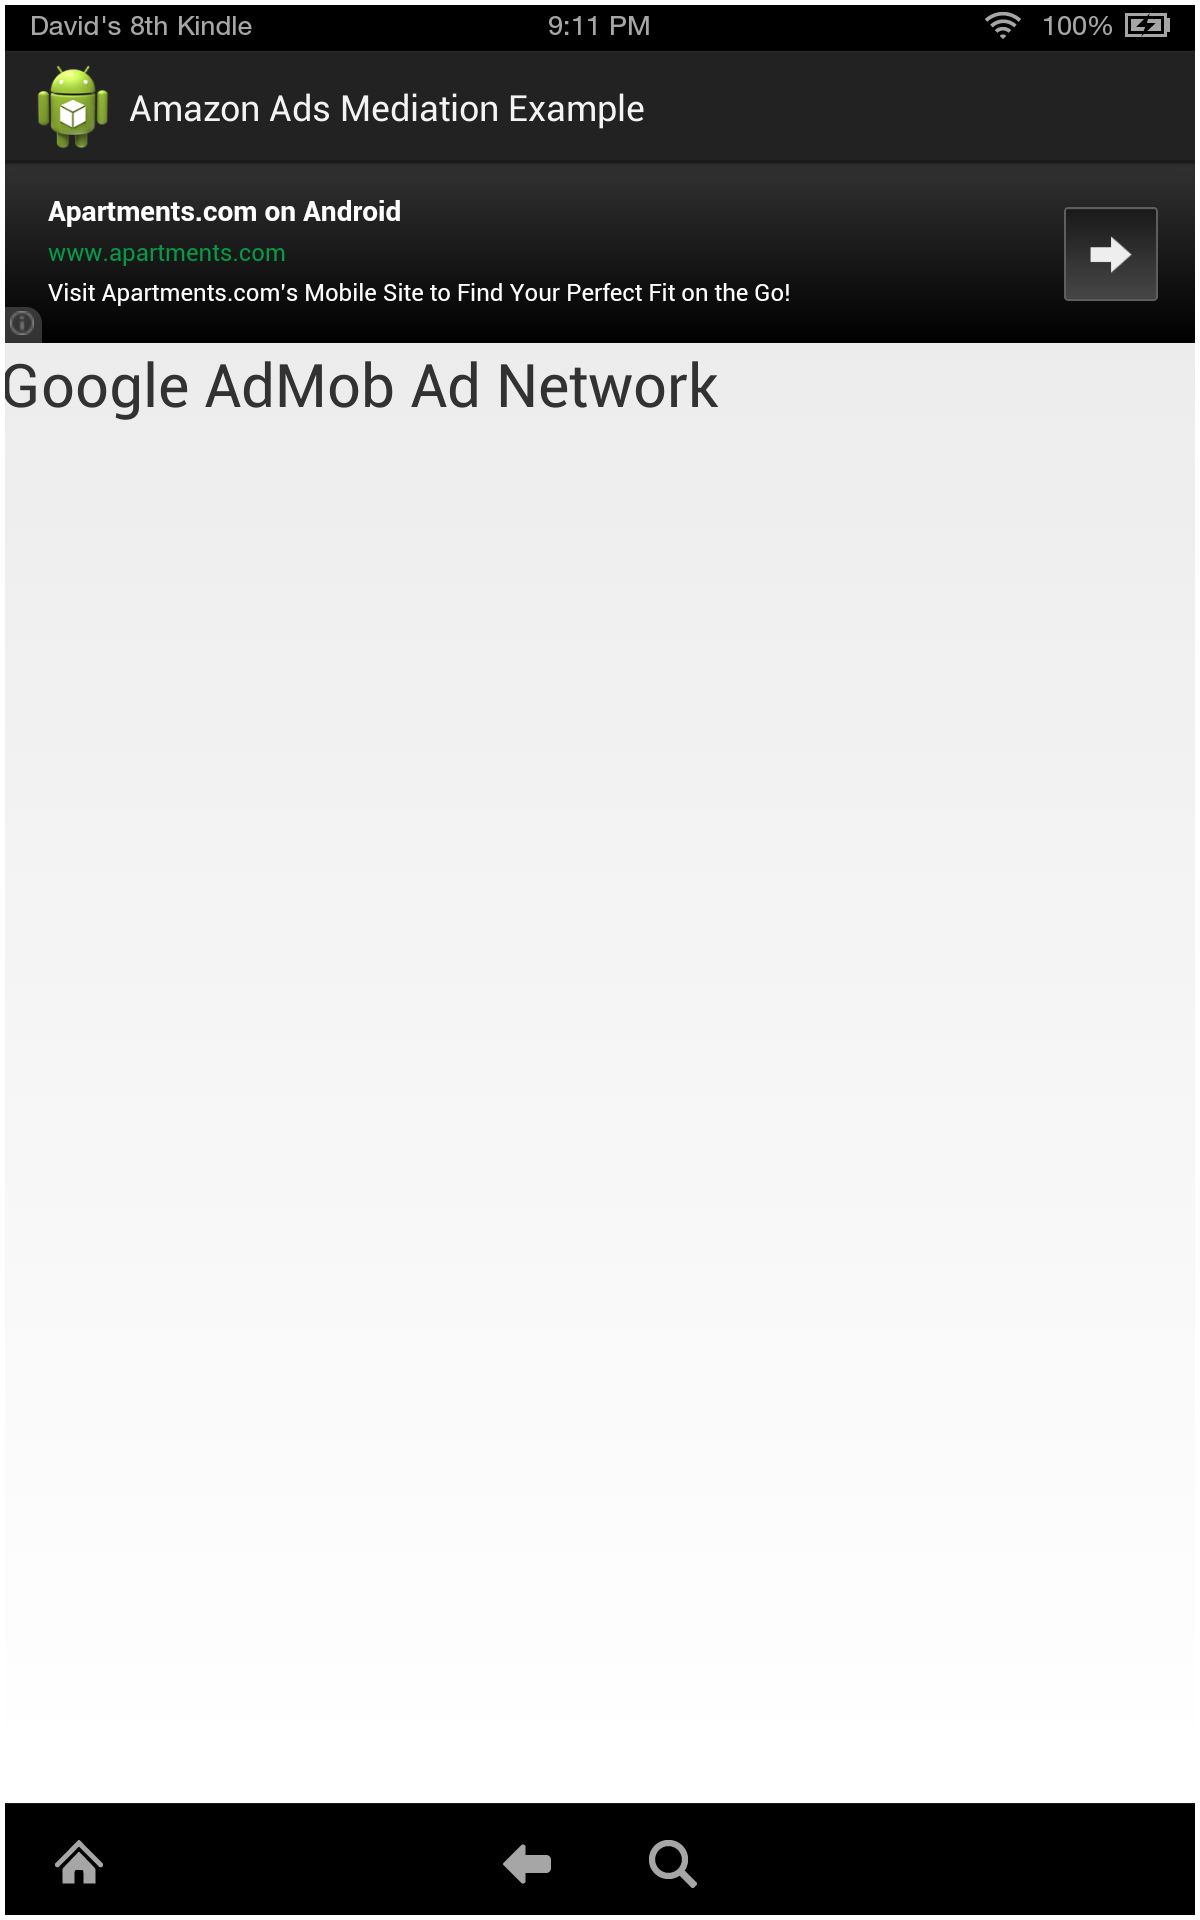 Here are some screenshots of the AdMob ad being loaded on a Kindle Fire HDX device